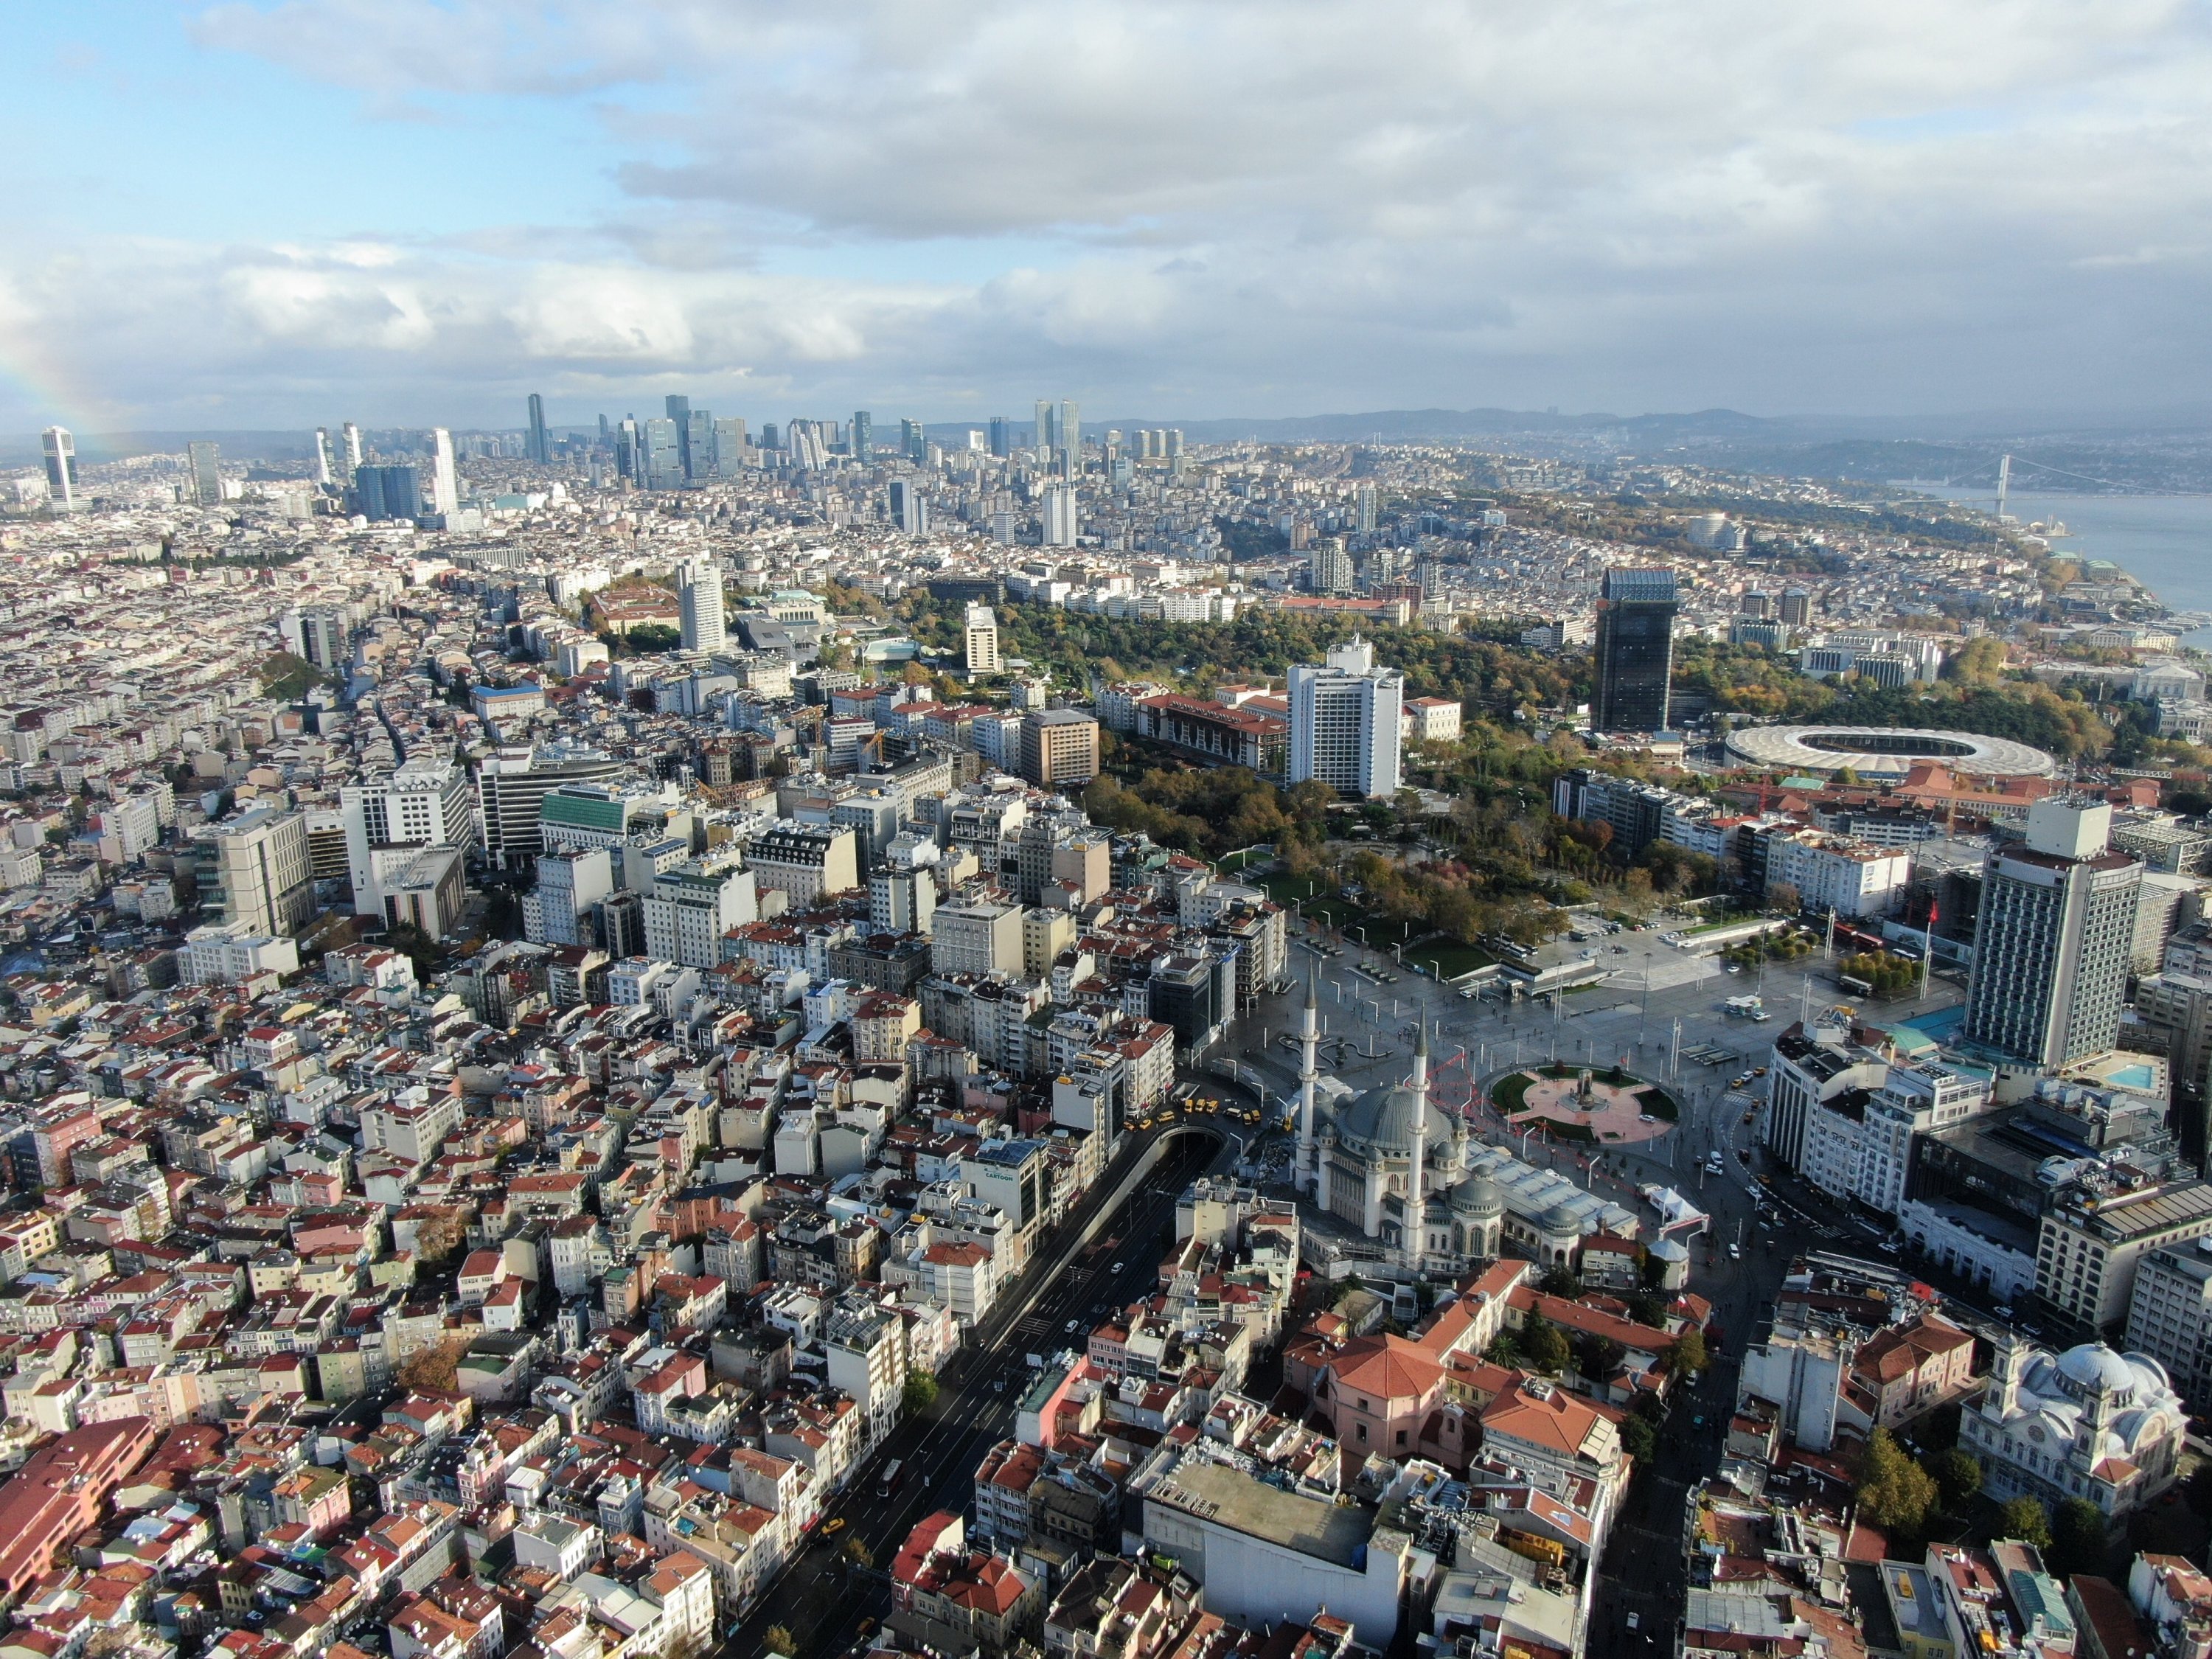 Villas of Popular Districts of Istanbul